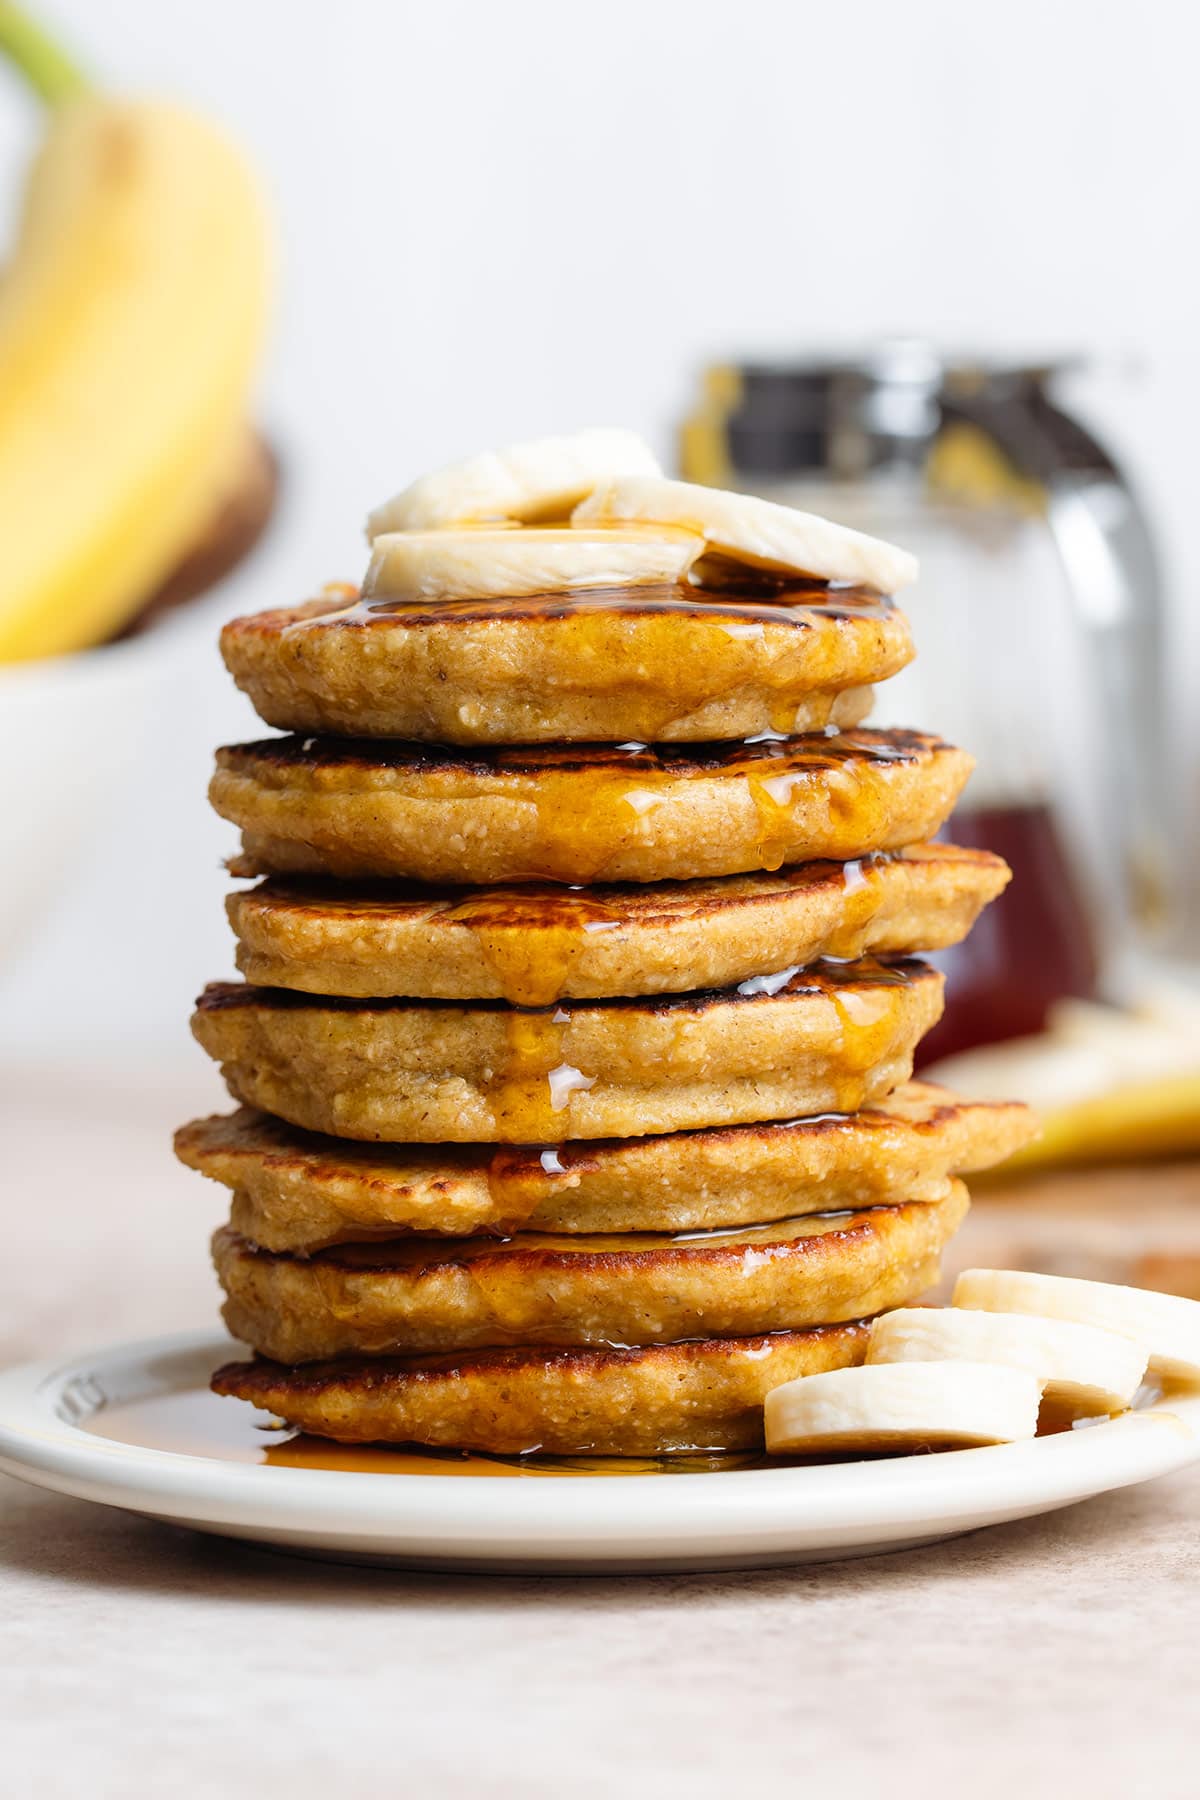 Pancake stack topped with banana slices on a small white plate with bananas and maple syrup in the background.